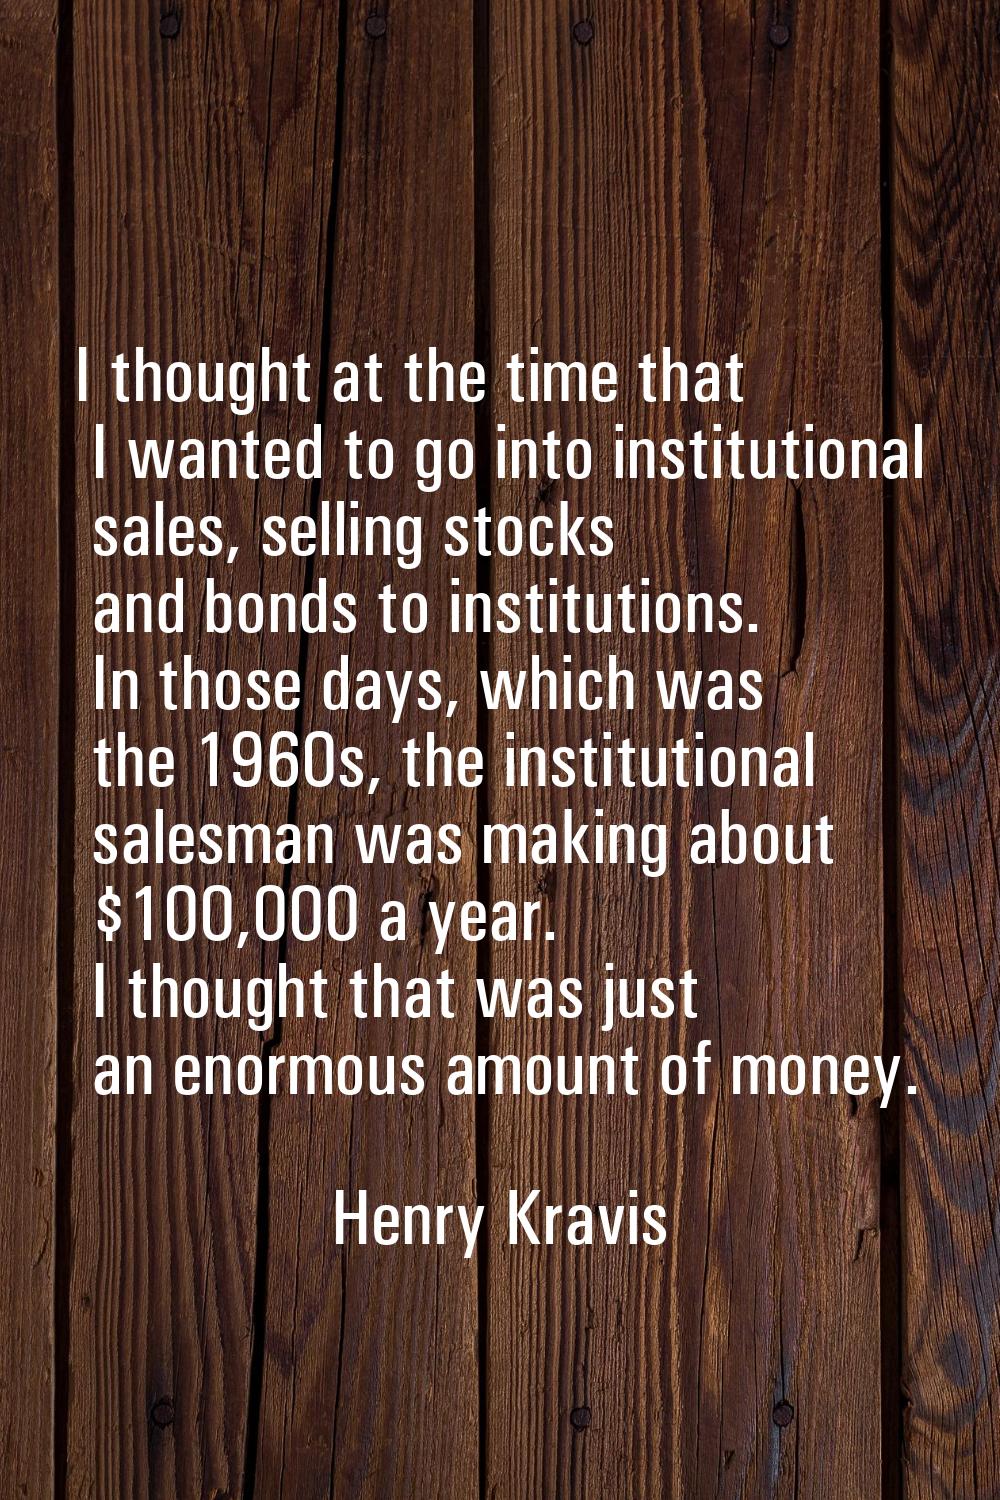 I thought at the time that I wanted to go into institutional sales, selling stocks and bonds to ins